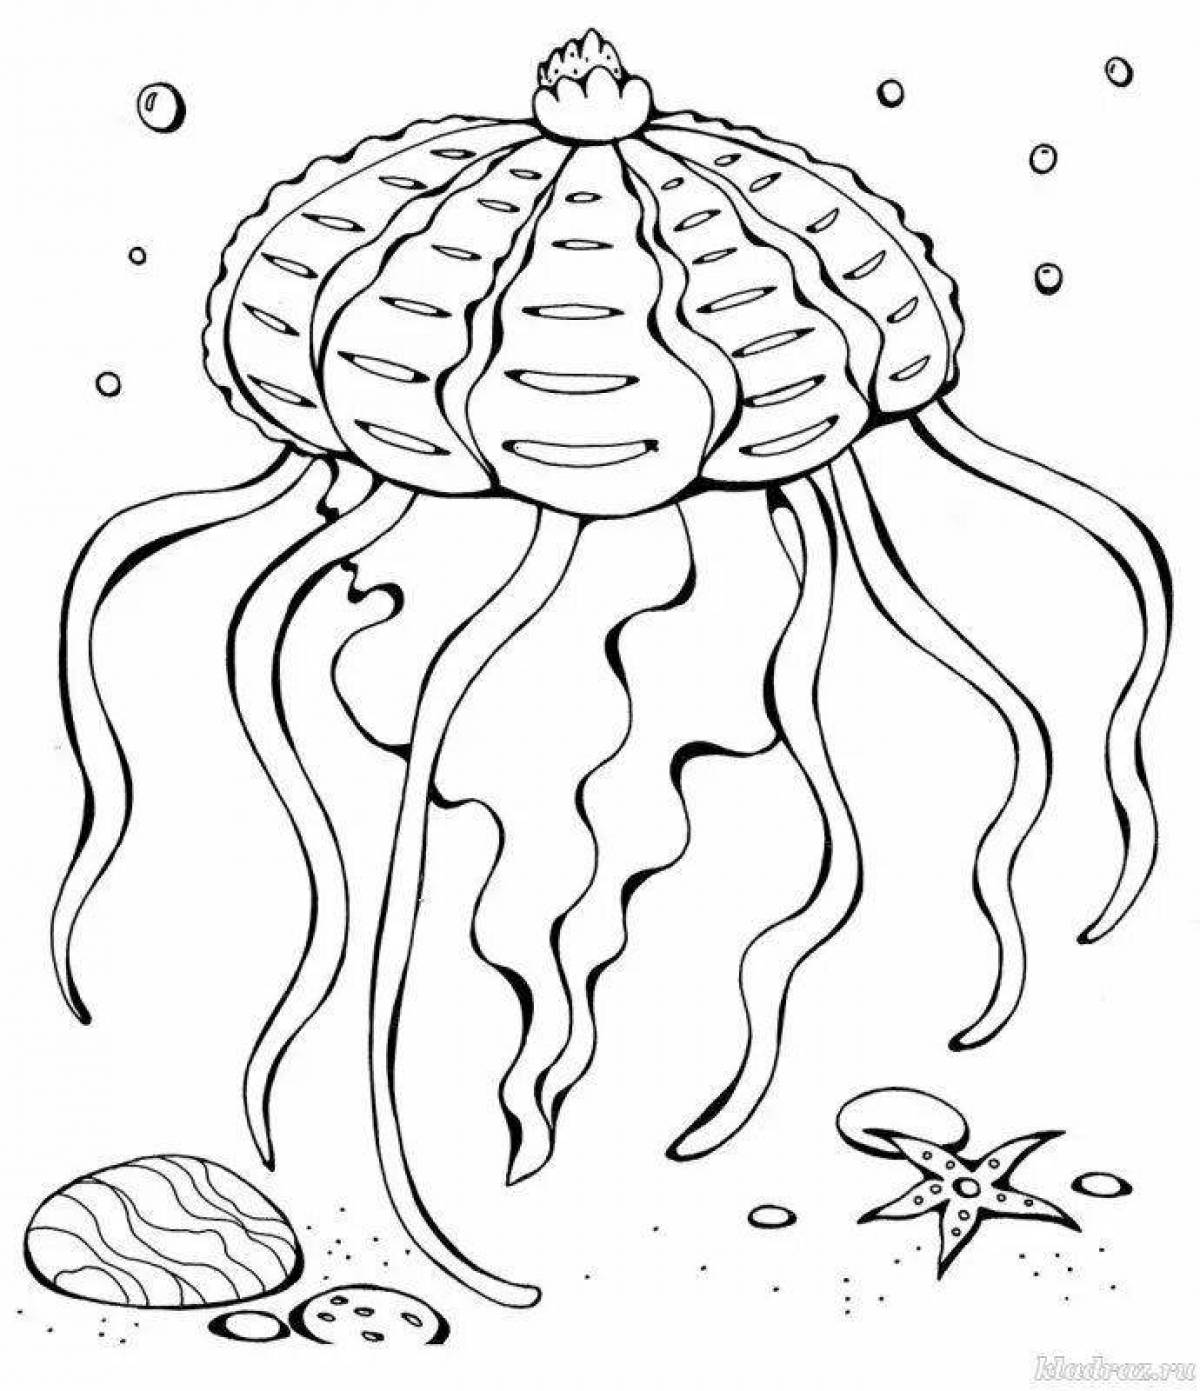 Colorful marine life coloring page for 6-7 year olds